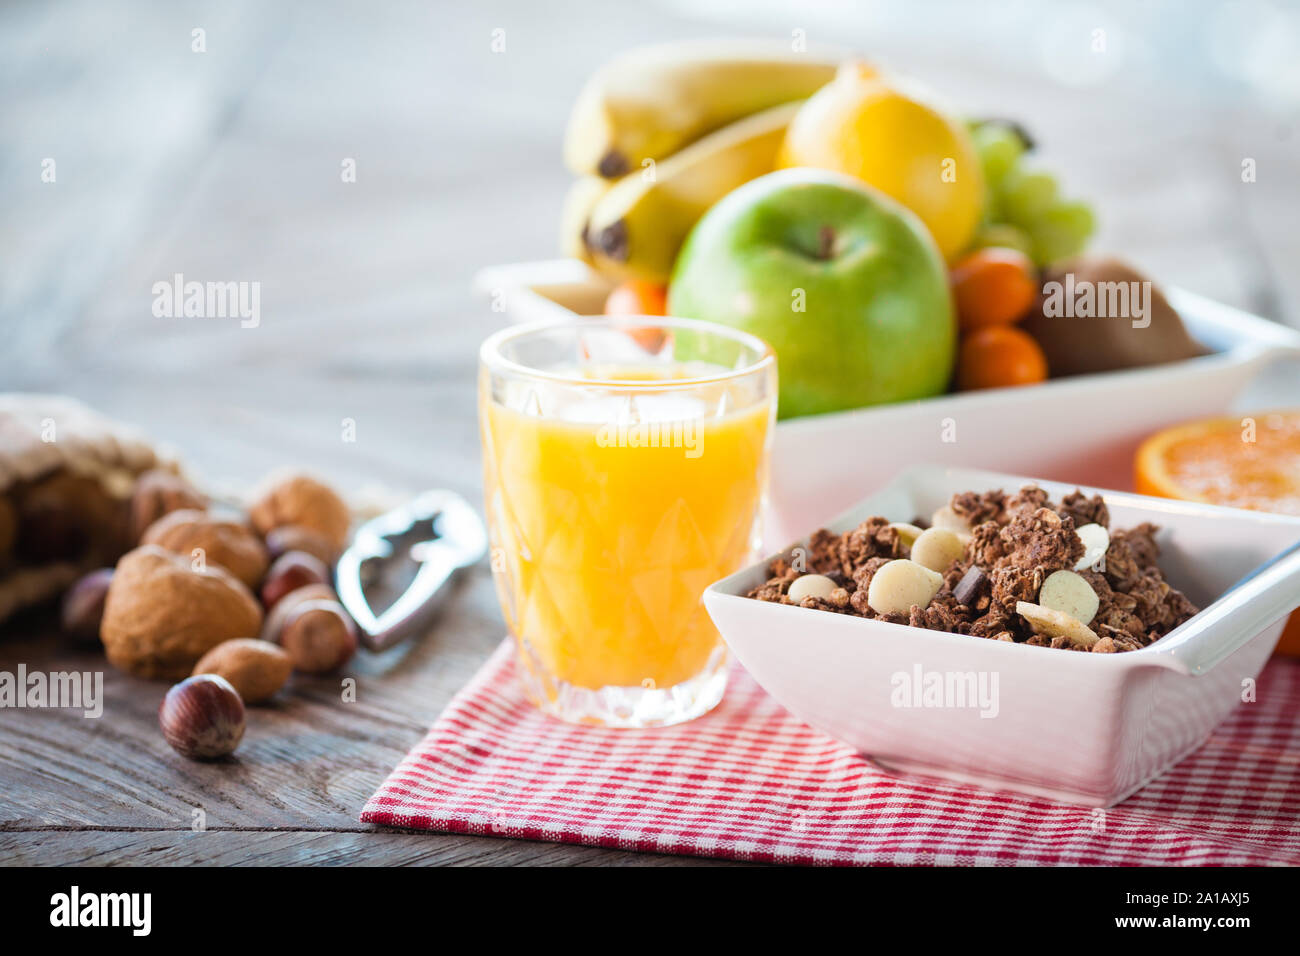 Healthy breakfast on the table Stock Photo